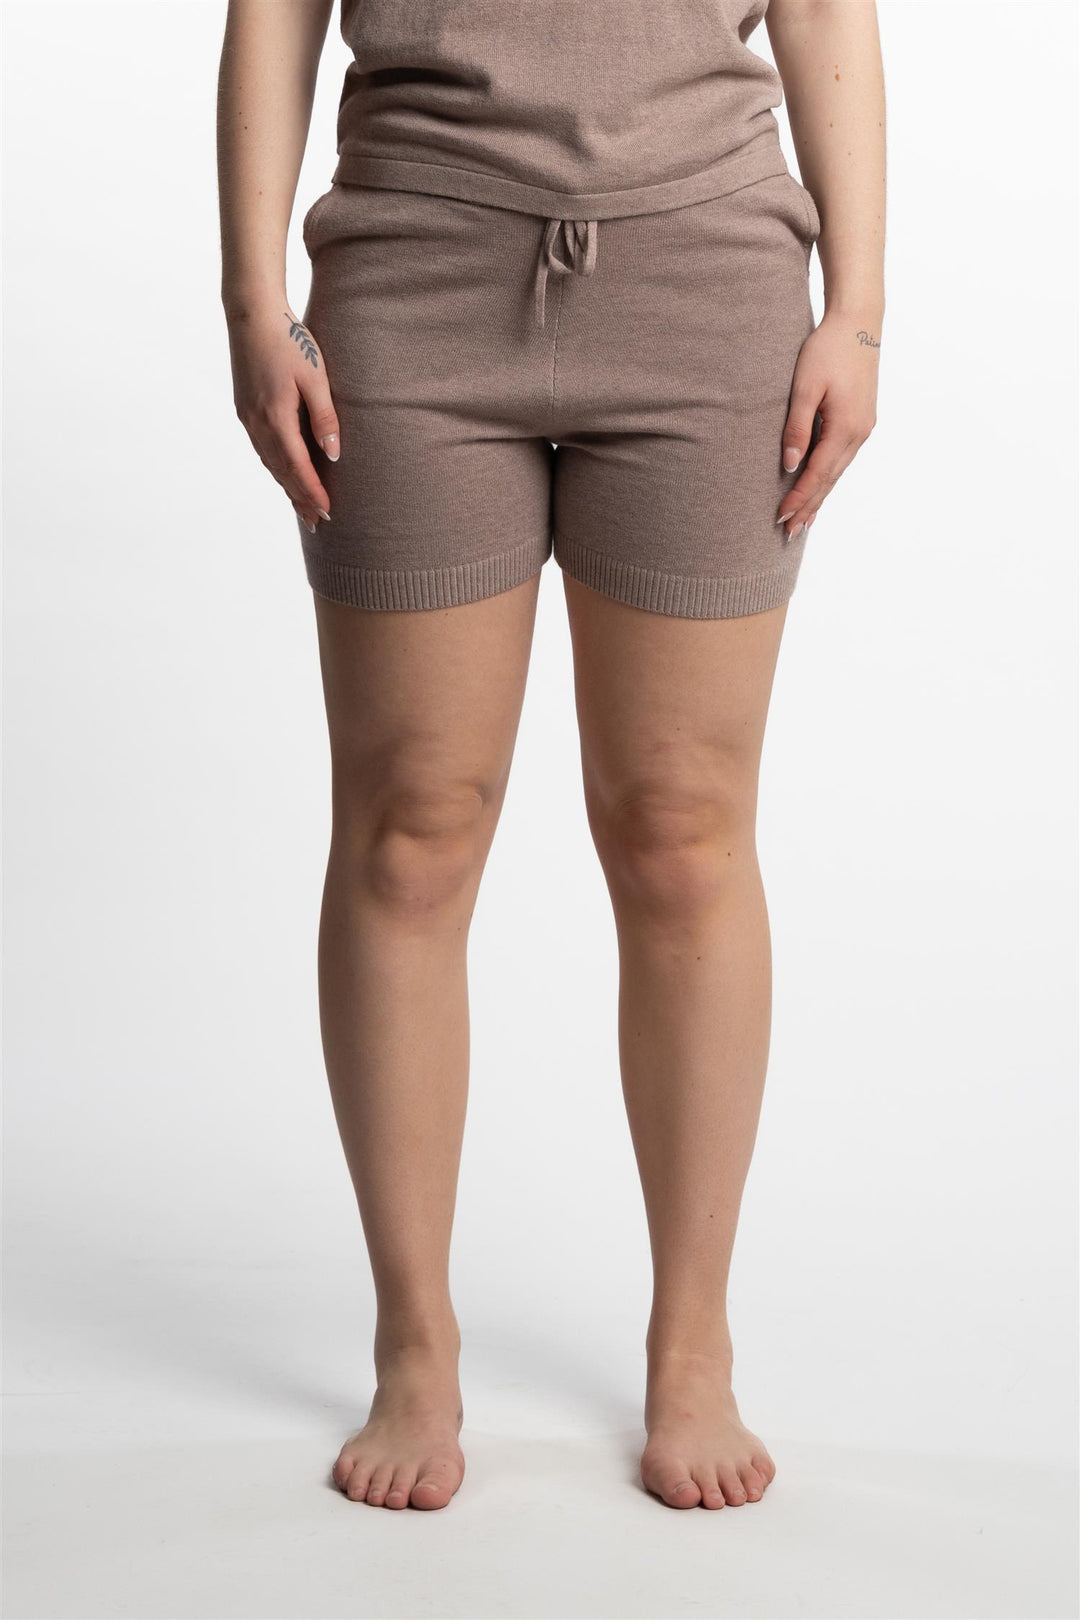 Cleo Cotton Cashmere - Taupe Brown